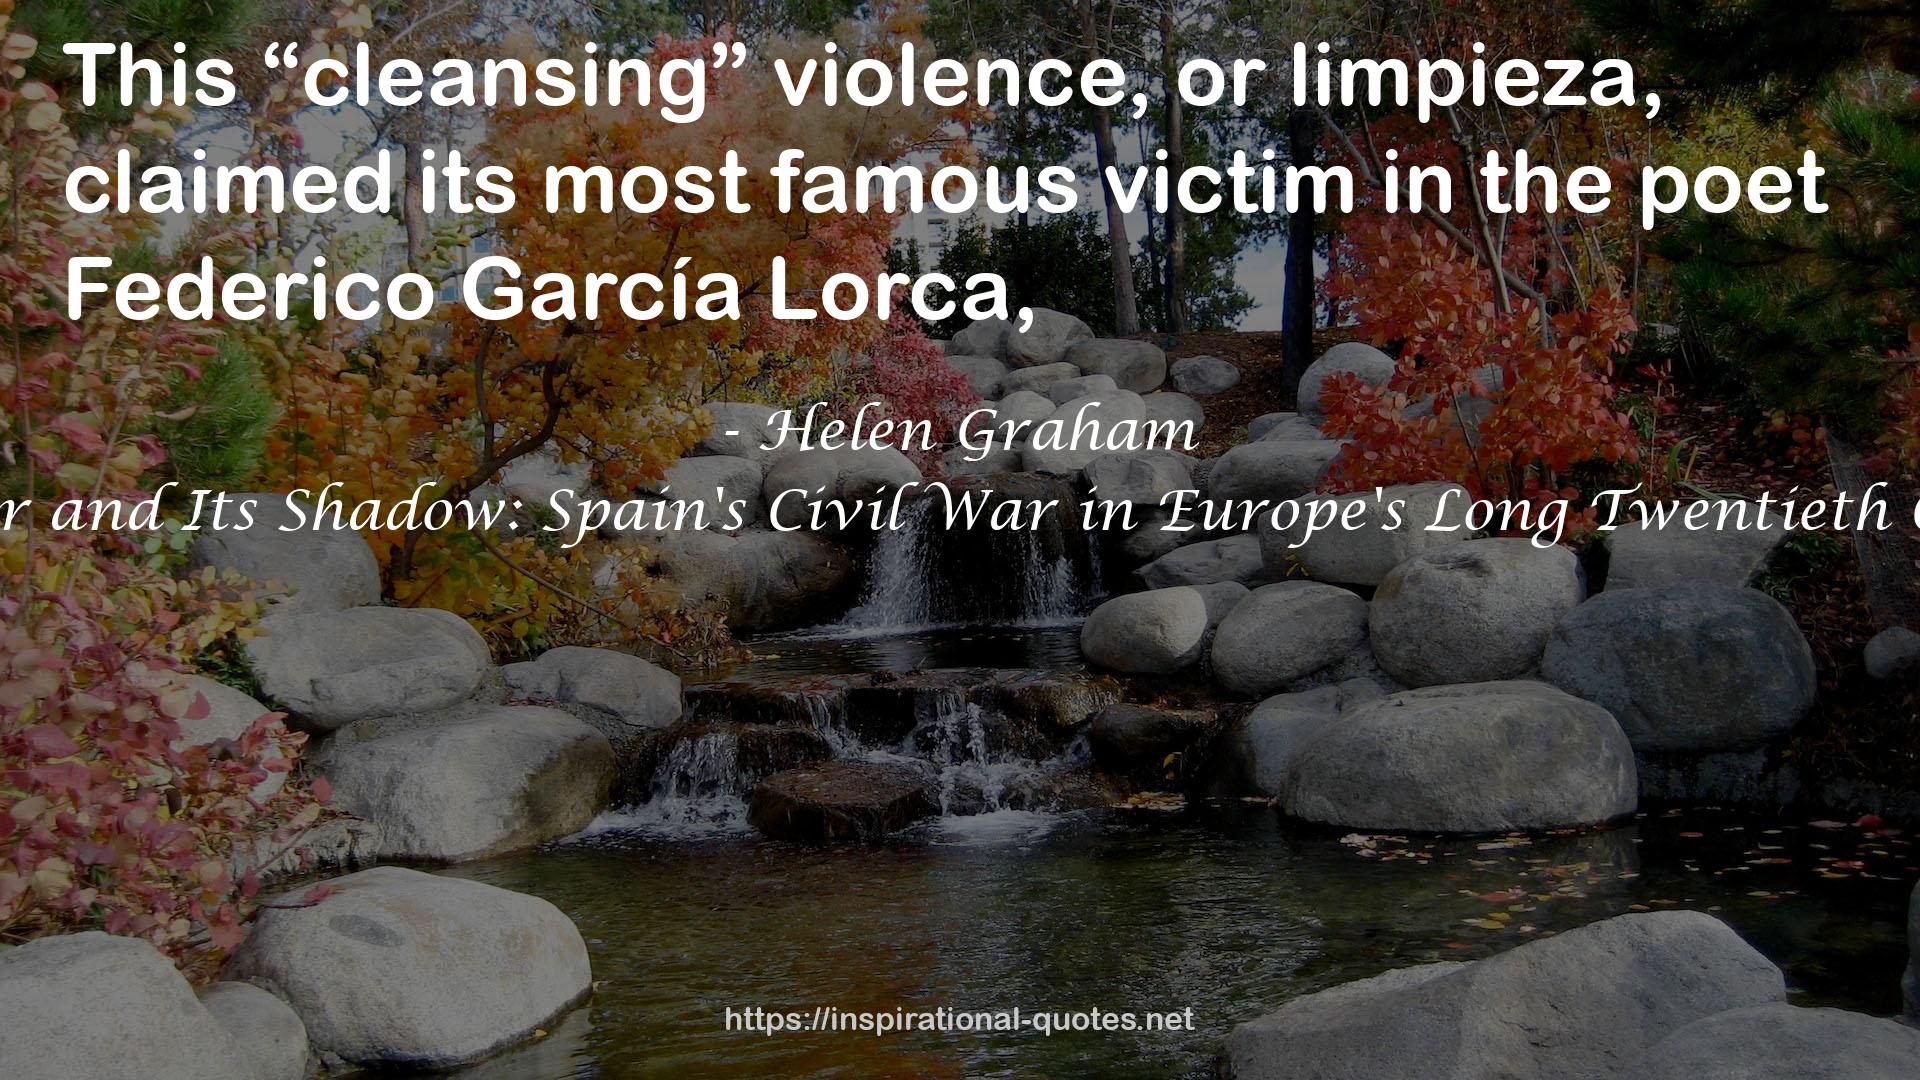 The War and Its Shadow: Spain's Civil War in Europe's Long Twentieth Century QUOTES